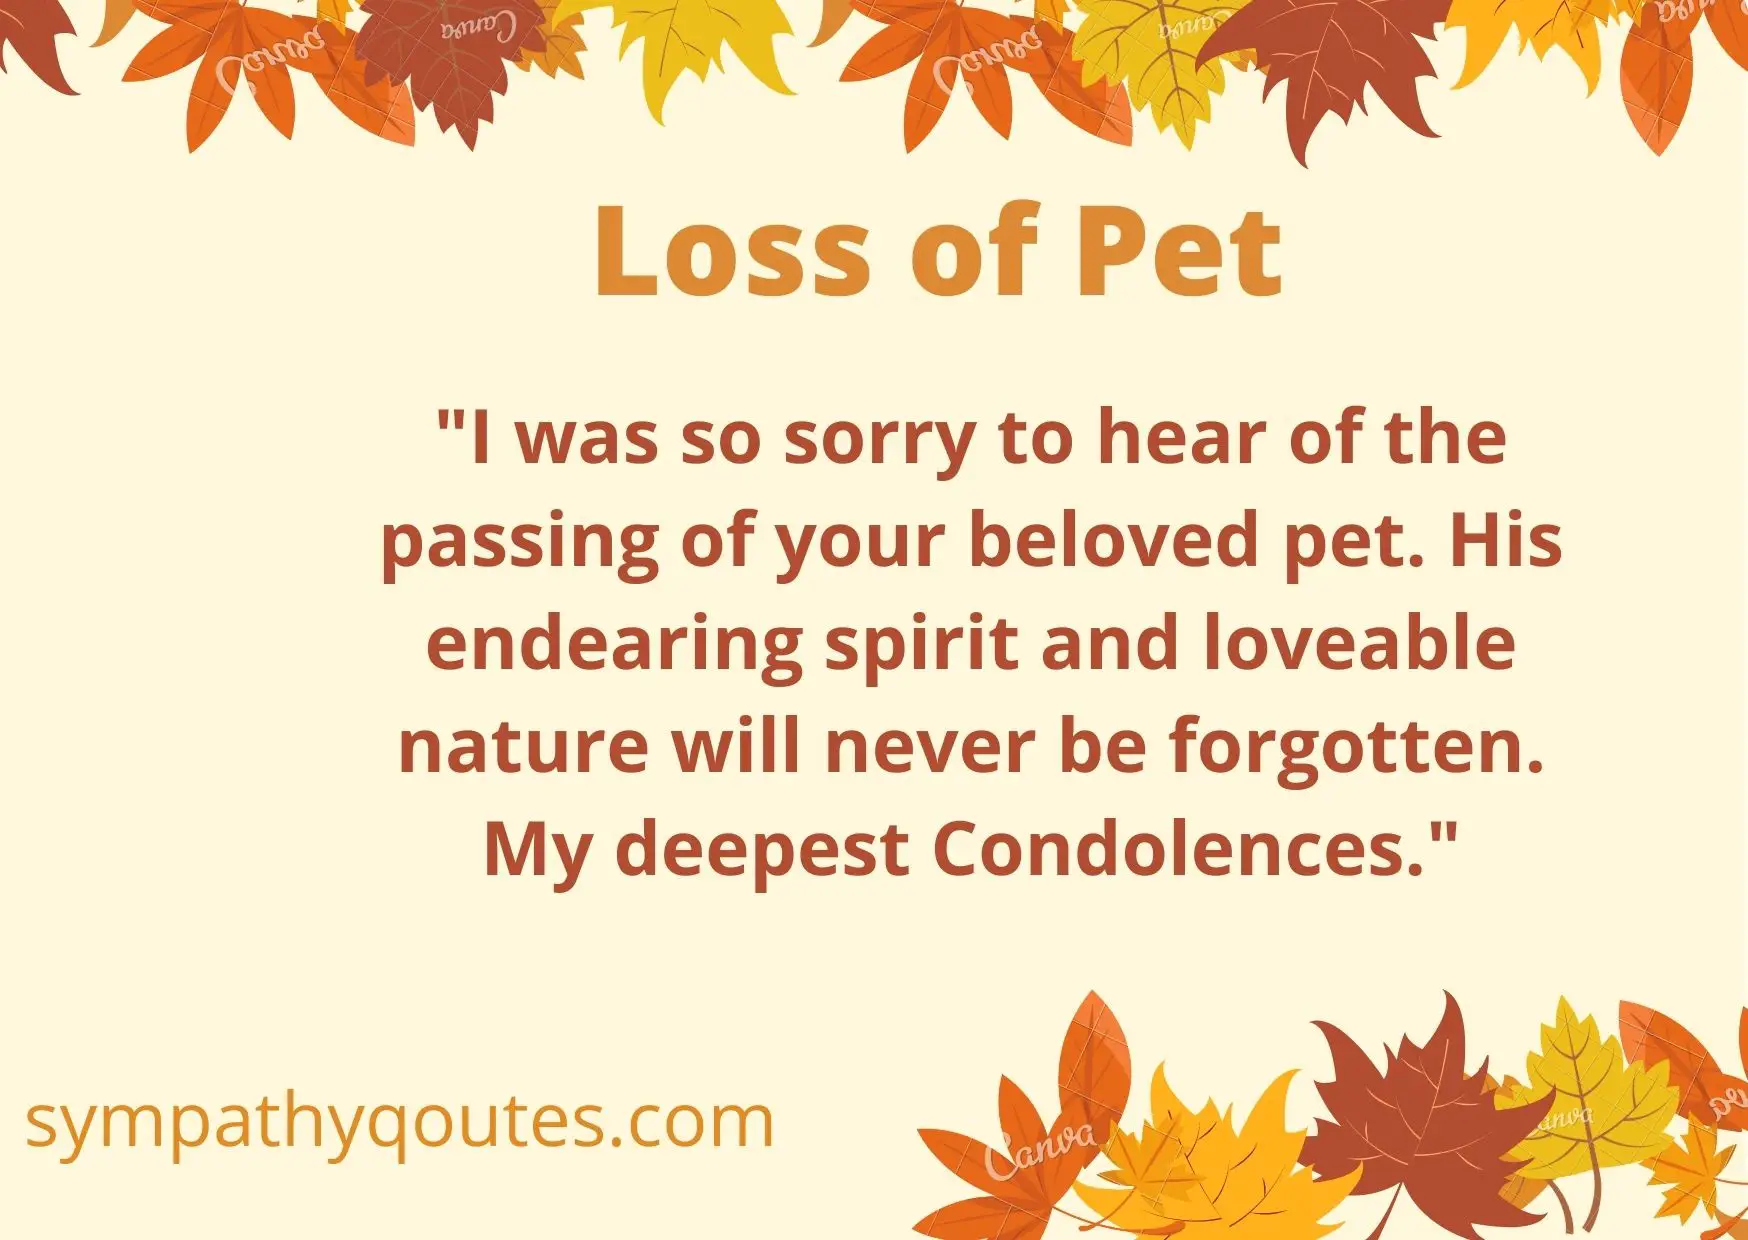  Condolence Messages for Loss of Pet